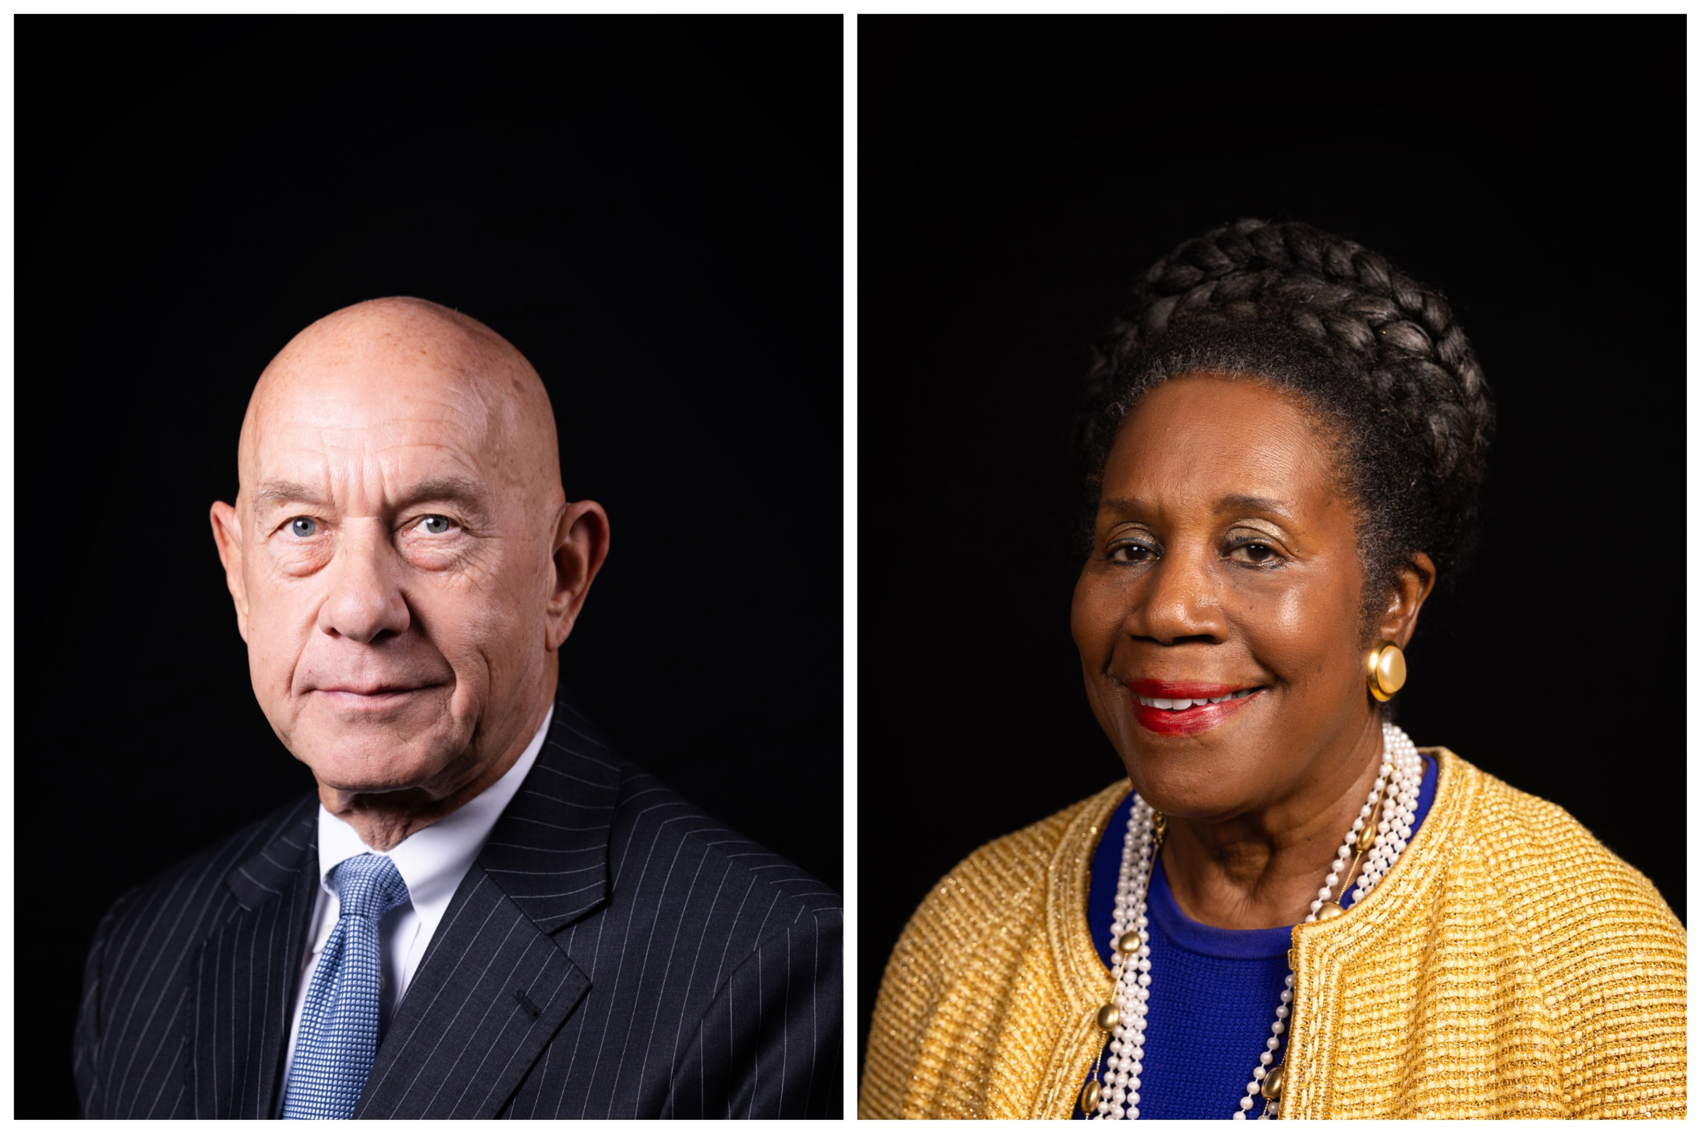 State Sen. John Whitmire, left, and U.S. Rep. Sheila Jackson Lee are headed for a Dec. 9 runoff.